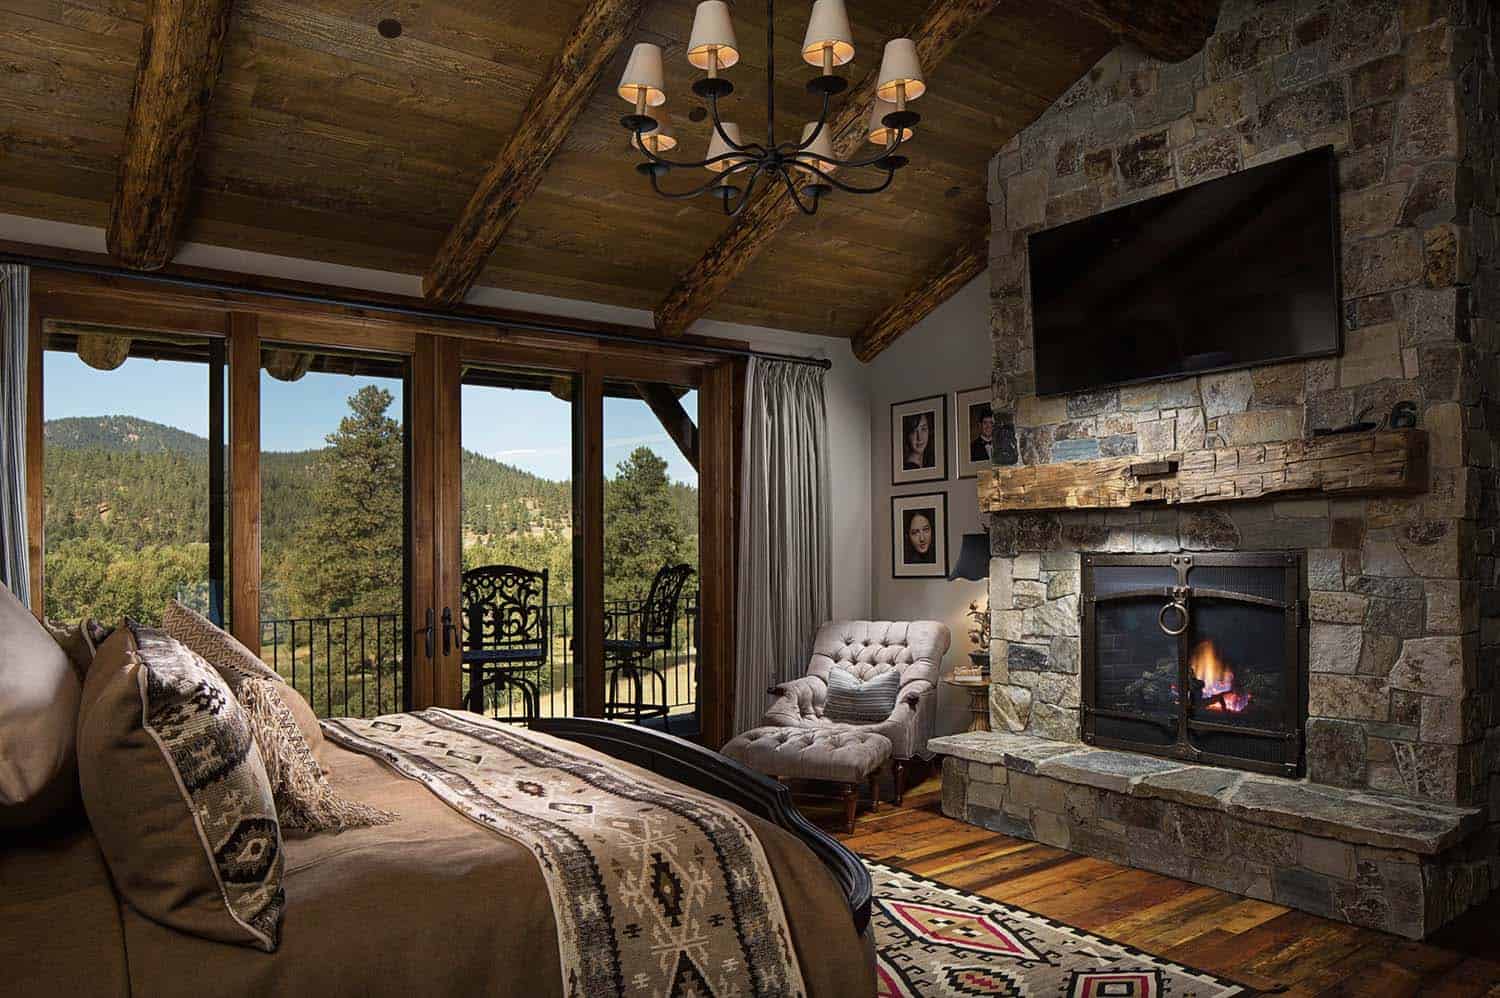 Rustic cabin style bedroom with fireplace